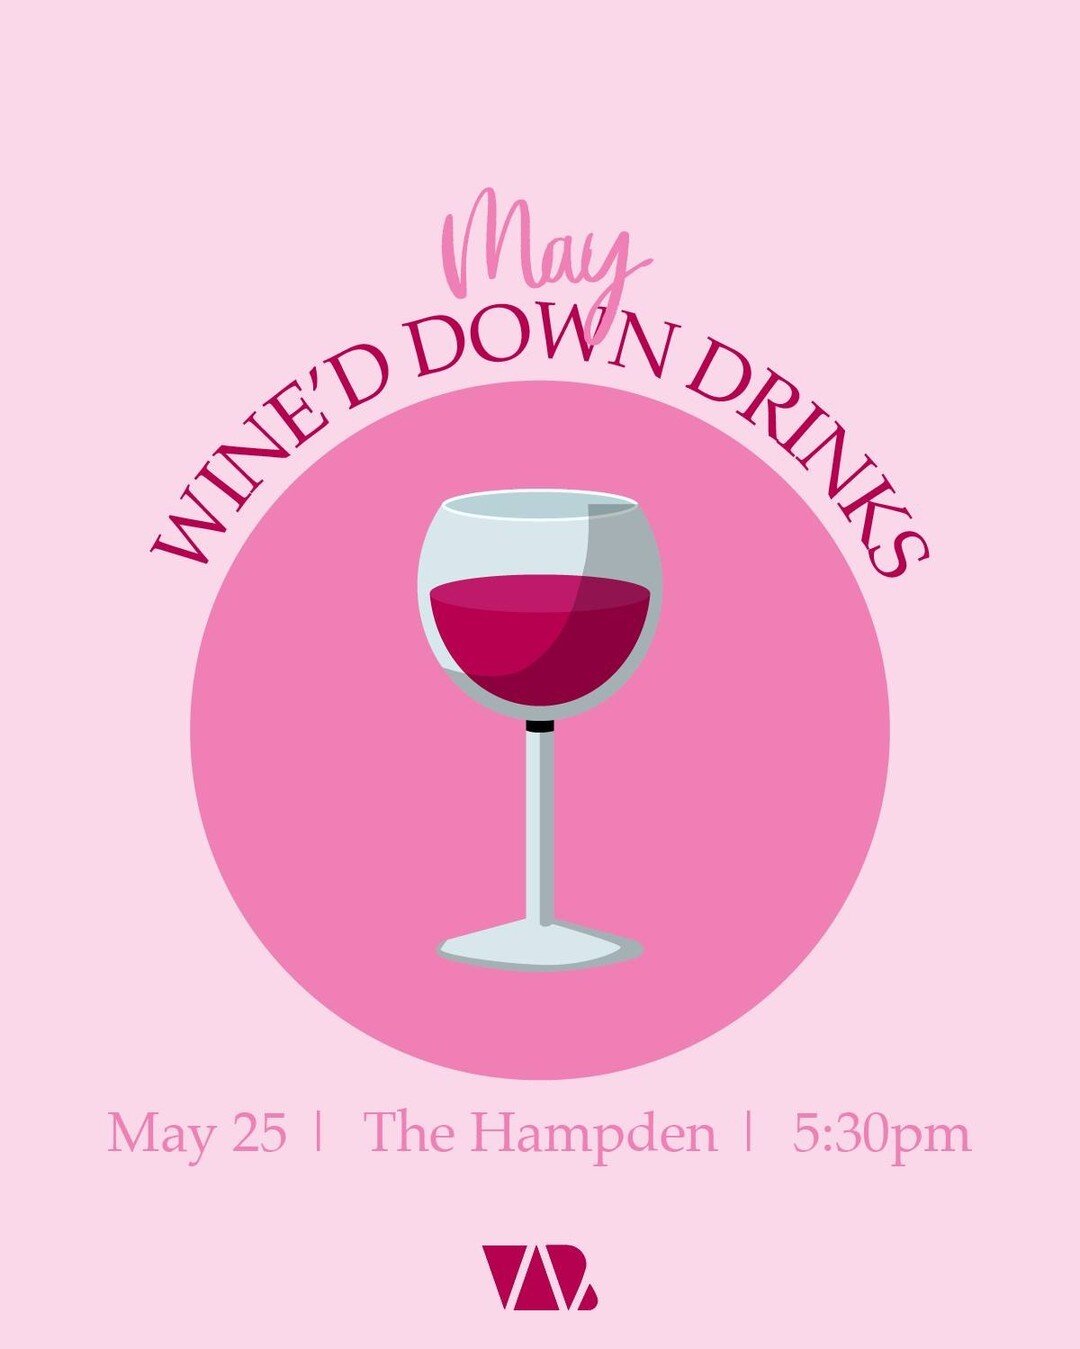 Join us for our May Wine'd Down Drinks! 🍷⁠
⁠
Our monthly catch-ups see plenty of laughs and new friendships, so we welcome past members, current members, on the fence members, non-members... We would love to see all of your wonderful faces there!⁠
⁠